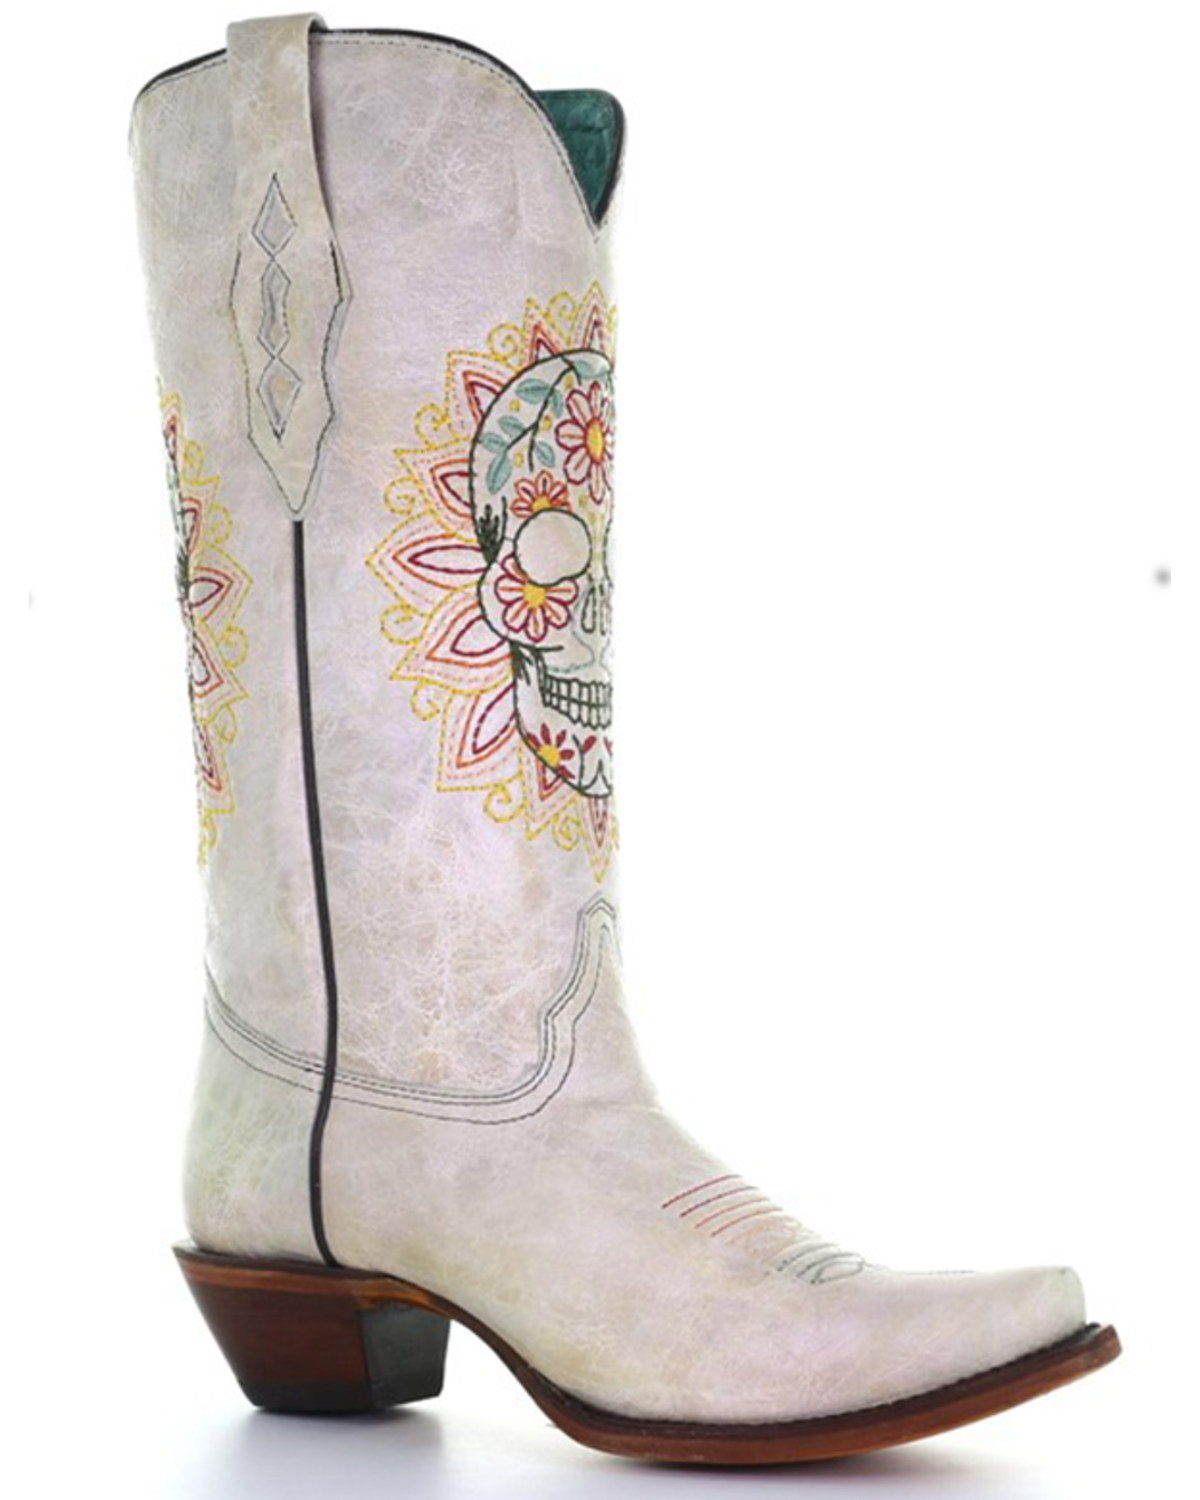 Corral Women's Embroidered Floral Skull Tall Western Boots - Snip Toe